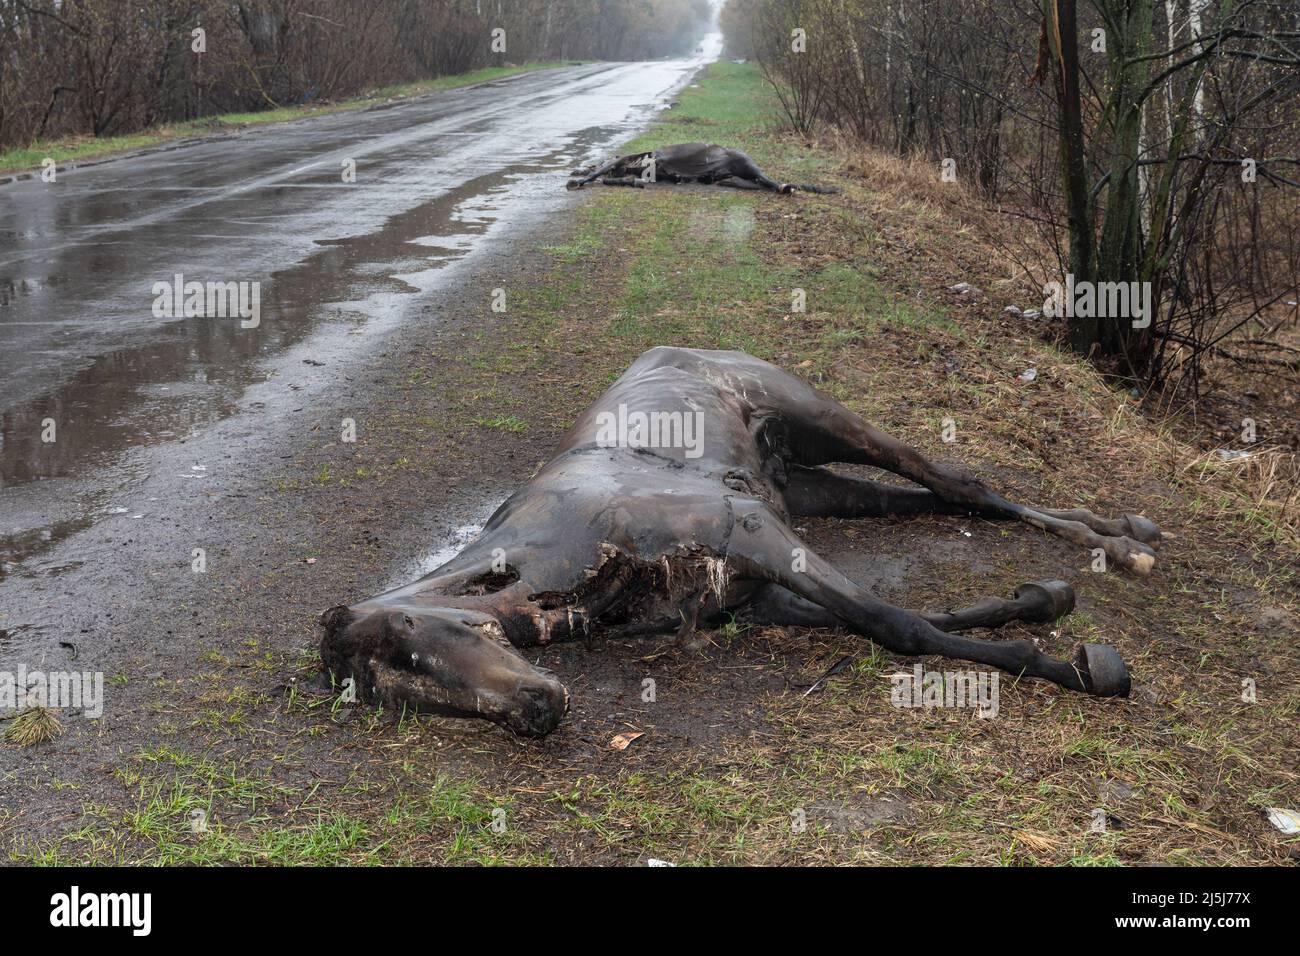 Ukraine. 22nd Apr, 2022. Dead horses killed by Russian invaders lie along the road in the Hostomil region. Russia invaded Ukraine on 24 February 2022, triggering the largest military attack in Europe since World War II. (Photo by Mykhaylo Palinchak/SOPA Images/Sipa USA) Credit: Sipa USA/Alamy Live News Stock Photo